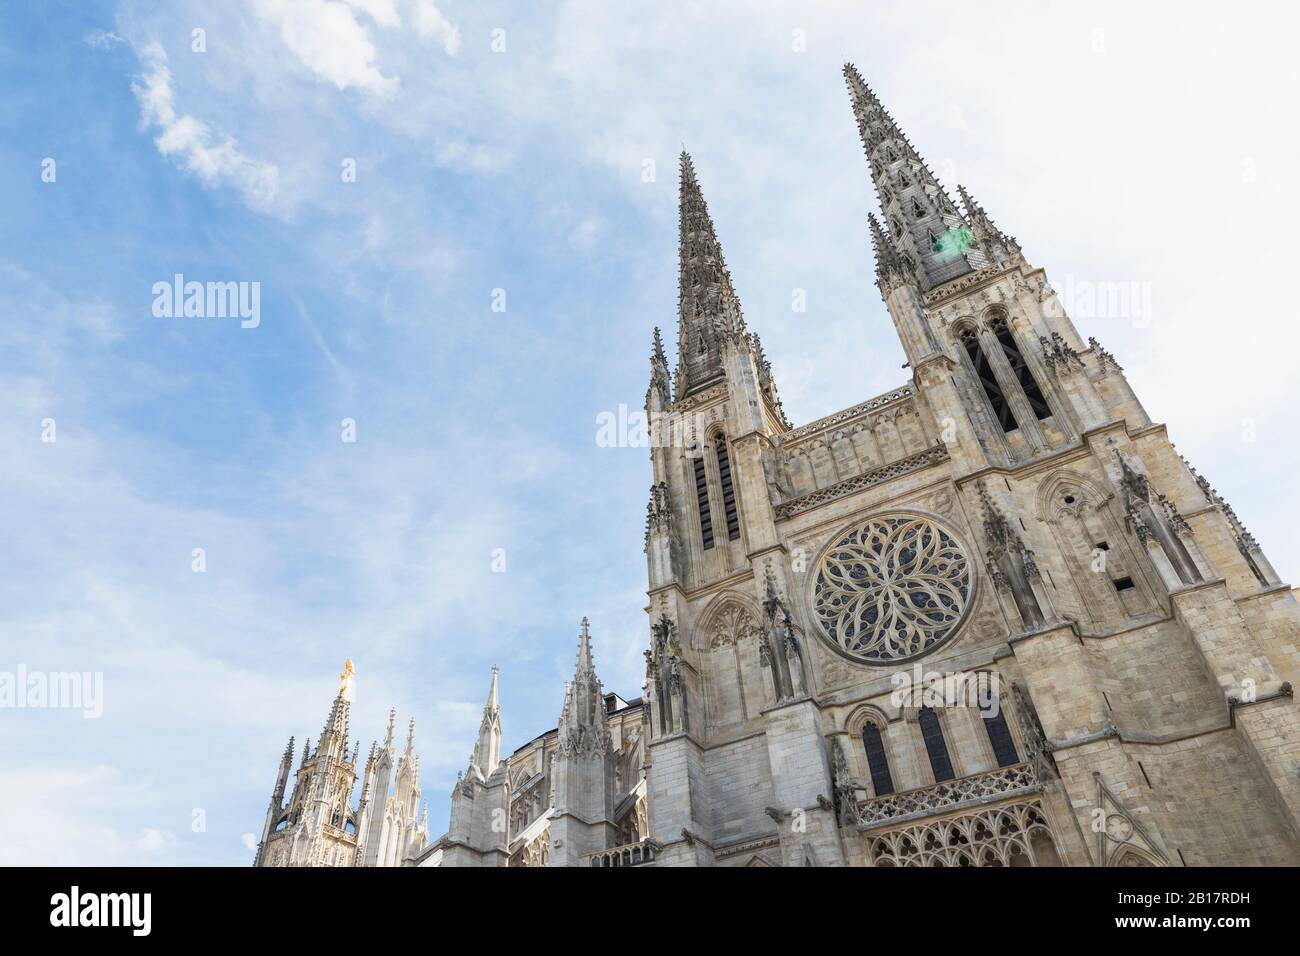 France, Gironde, Bordeaux, Low angle view of spires of Bordeaux Cathedral Stock Photo